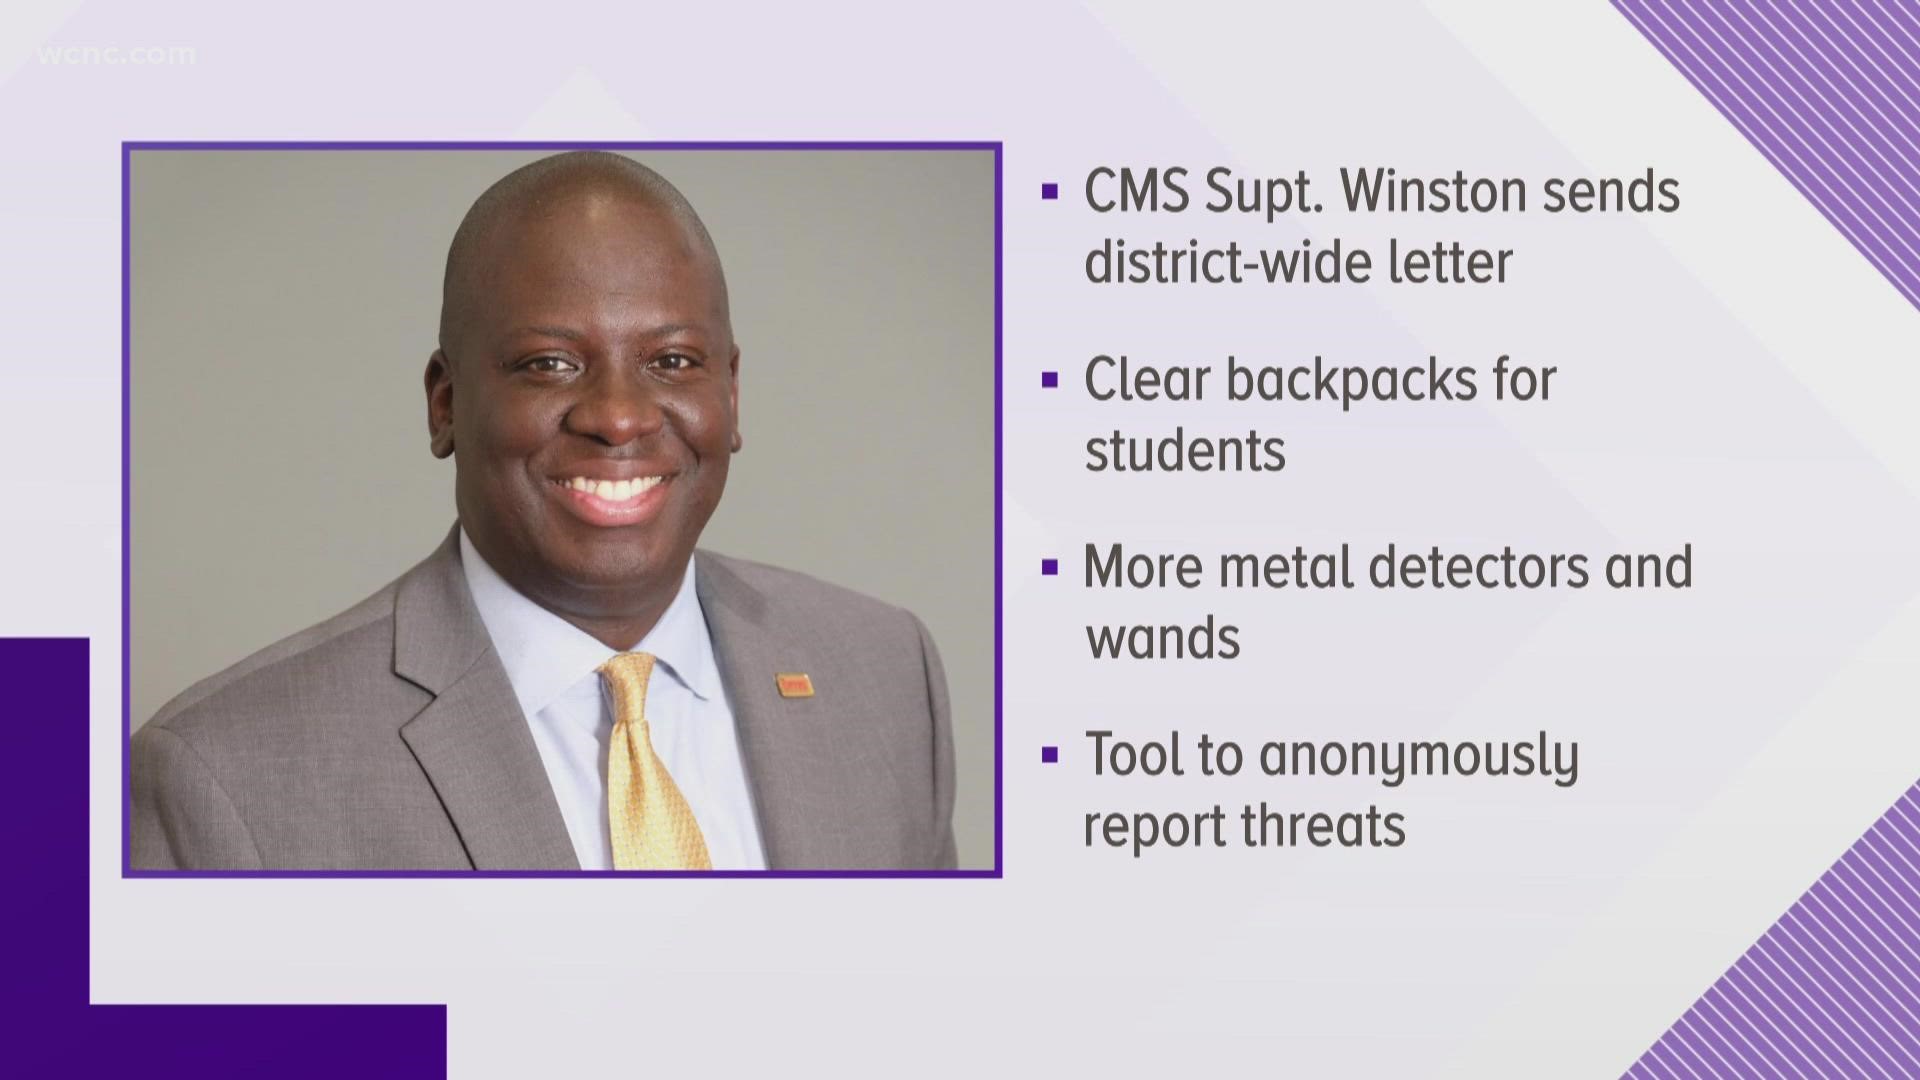 "Addressing this crisis is a top priority," Charlotte-Mecklenburg Schools Superintendent Earnest Winston said in a letter to parents on Friday.